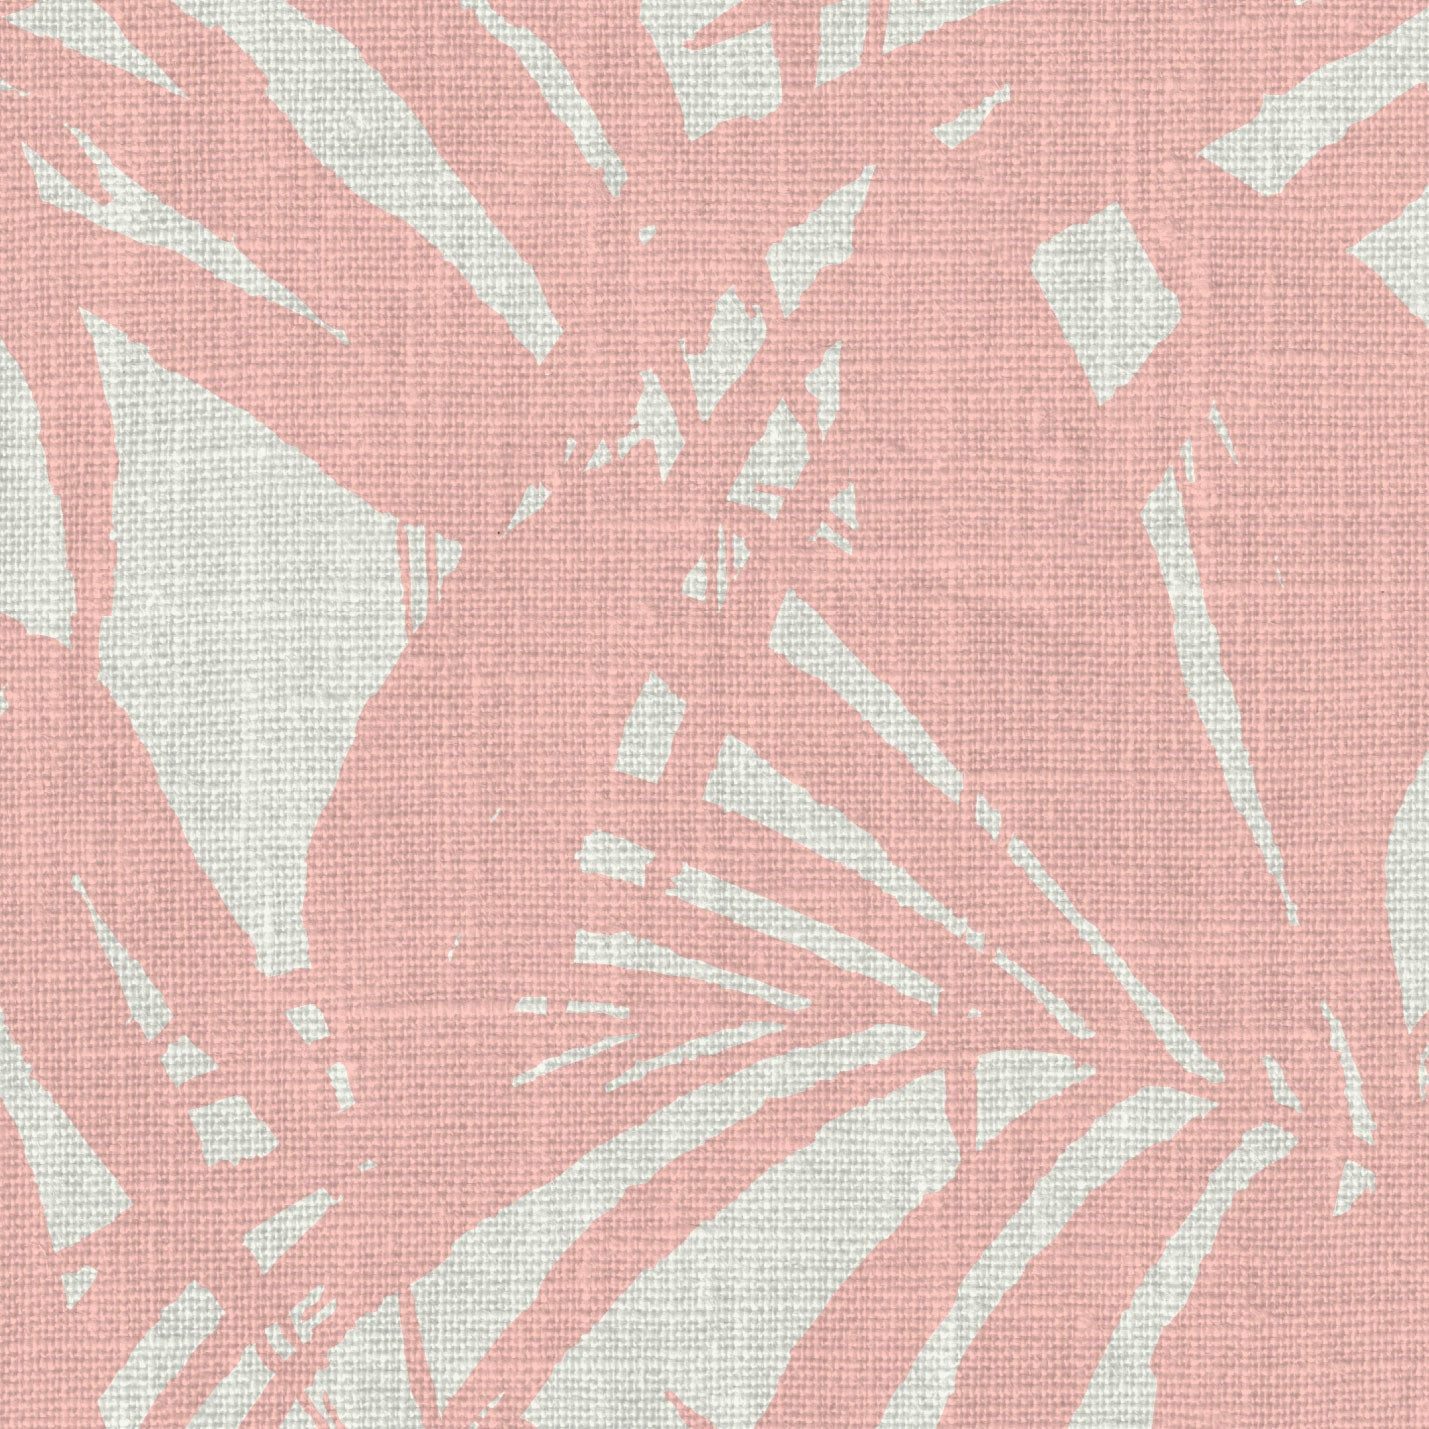 wallpaper oversize tropical leaf Natural Textured Eco-Friendly Non-toxic High-quality Sustainable practices Sustainability Interior Design Wall covering Bold retro chic custom jungle garden botanical Seaside Coastal Seashore Waterfront Vacation home styling Retreat Relaxed beach vibes Beach cottage Shoreline Oceanfront white peach pink coral pastel baby orange linen